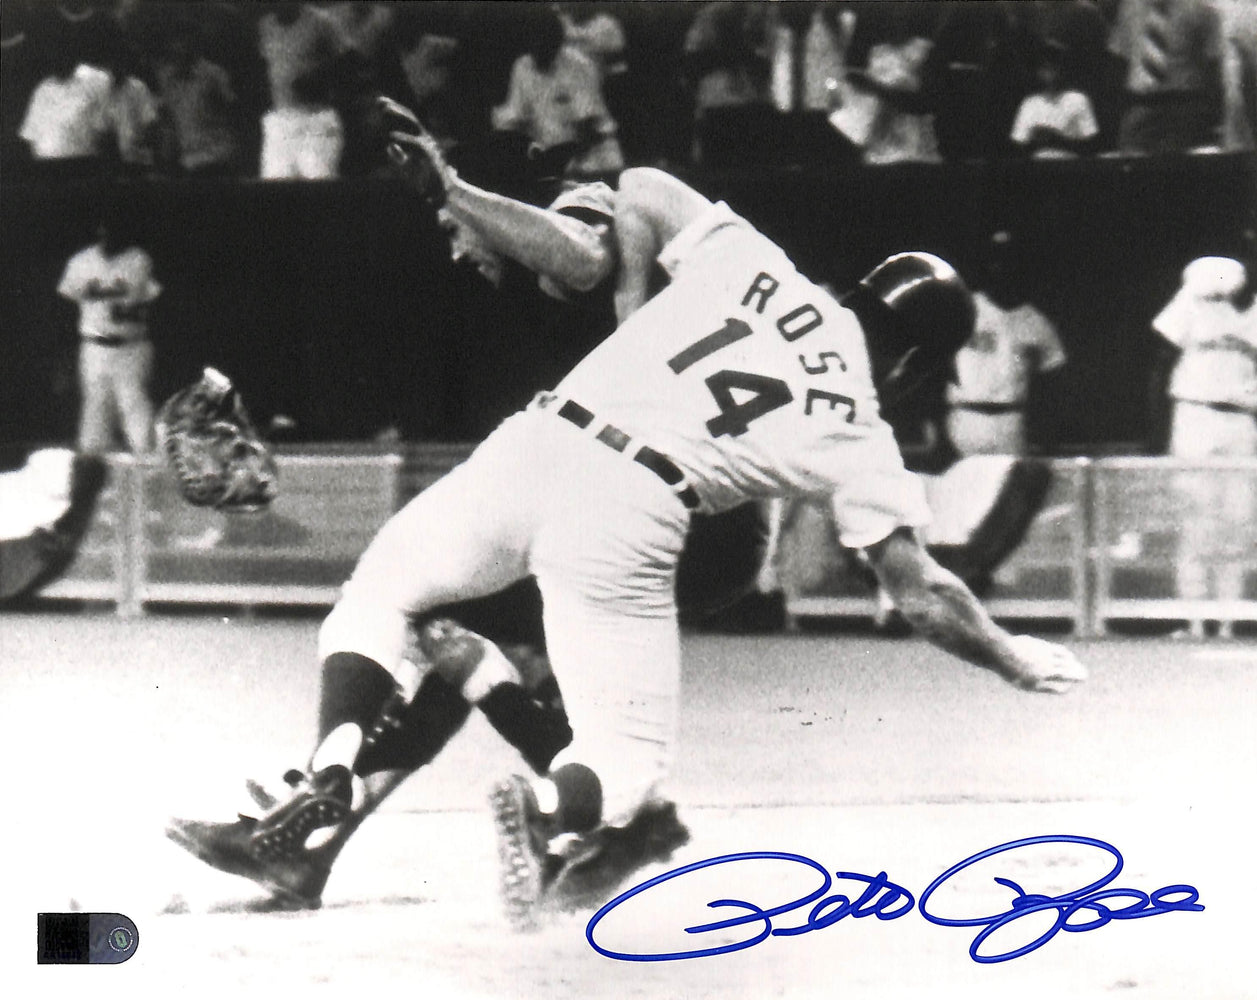 pete rose signed 8x10 photo all star game collision aiv aa 14648 certificate of authenticity